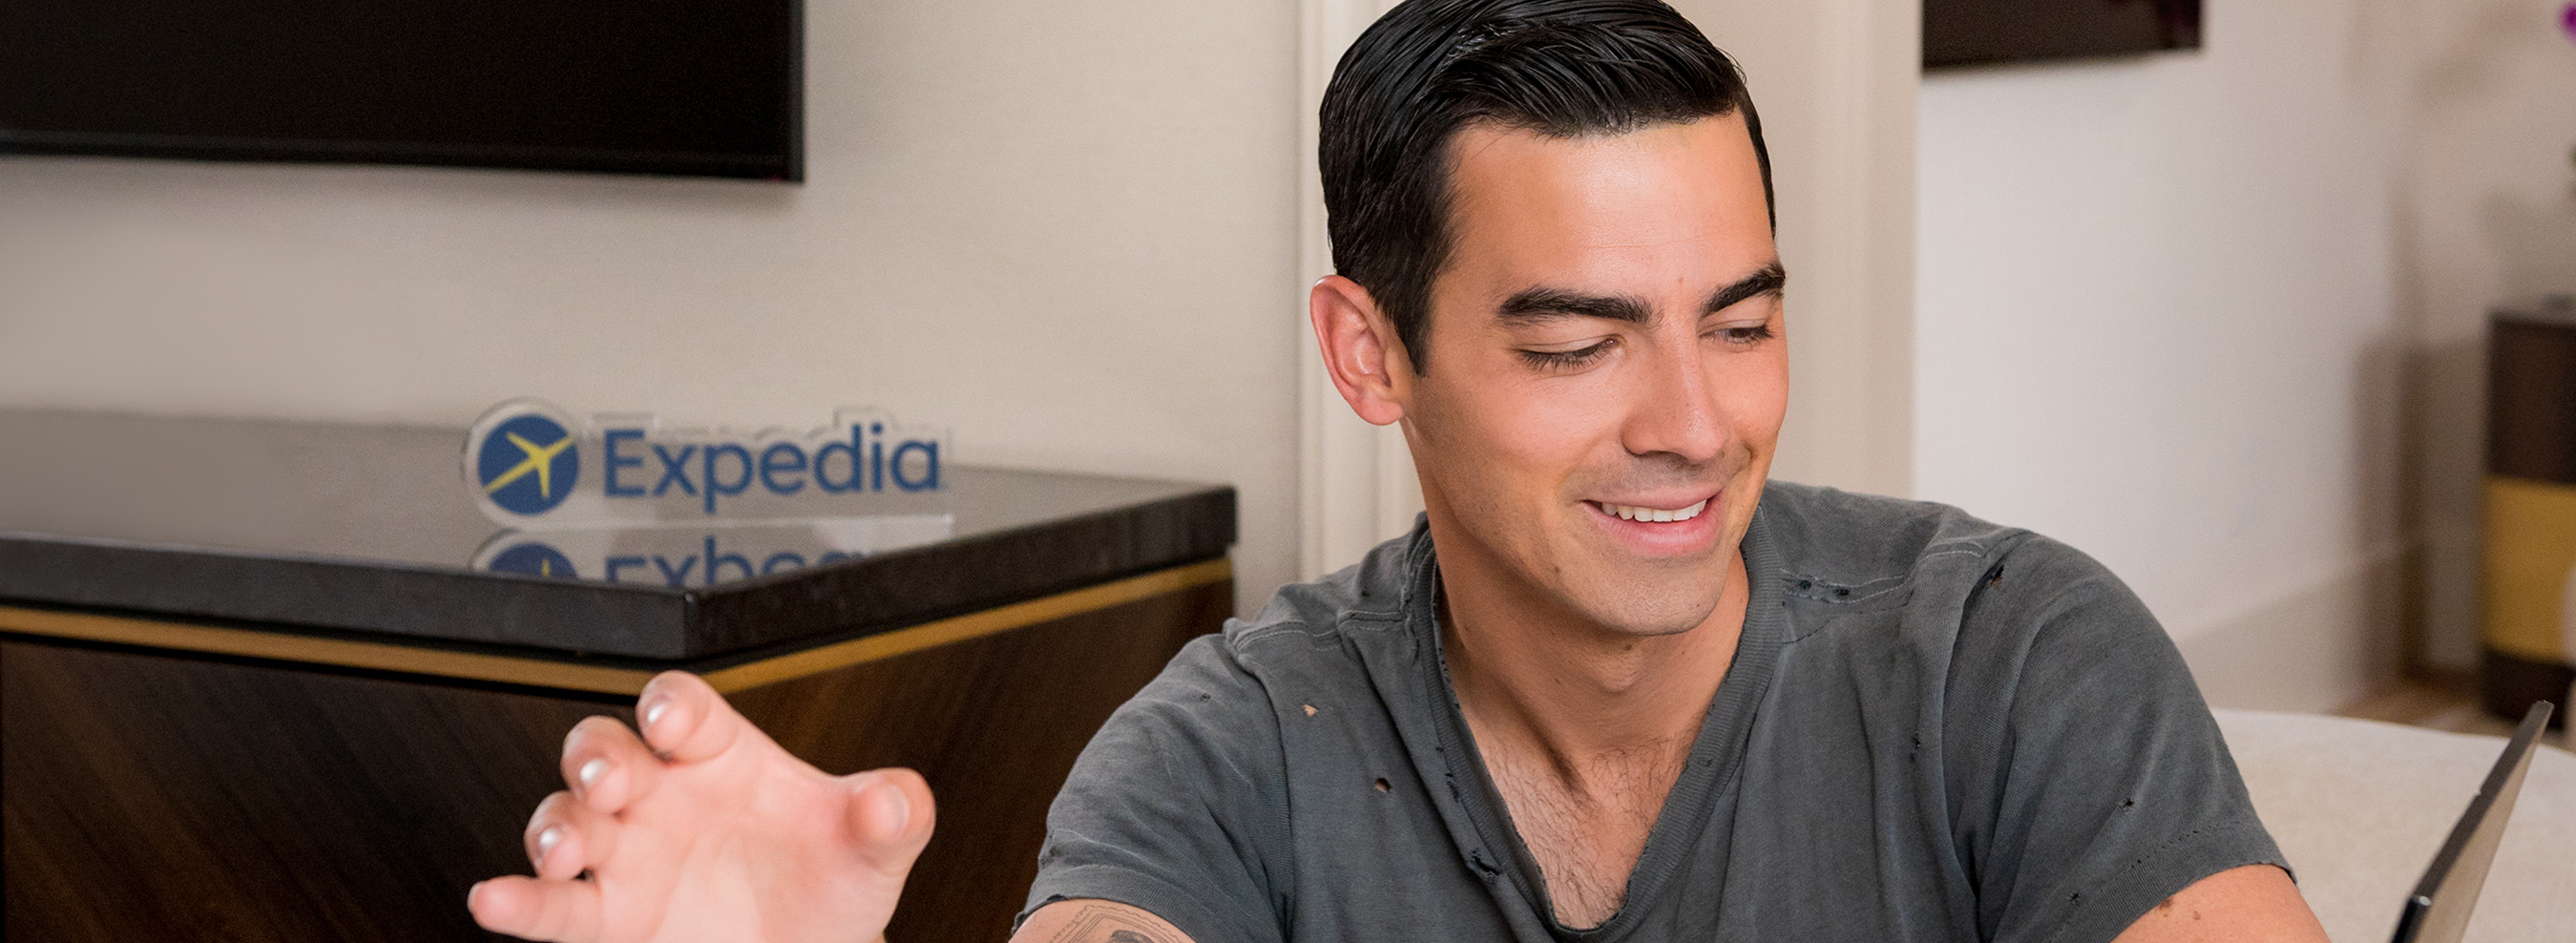 A sneak peek at the making of the Expedia Helping Hand – an exact replica of Joe Jonas’s right hand that will be offered in support to travelers who are eager to travel the world again